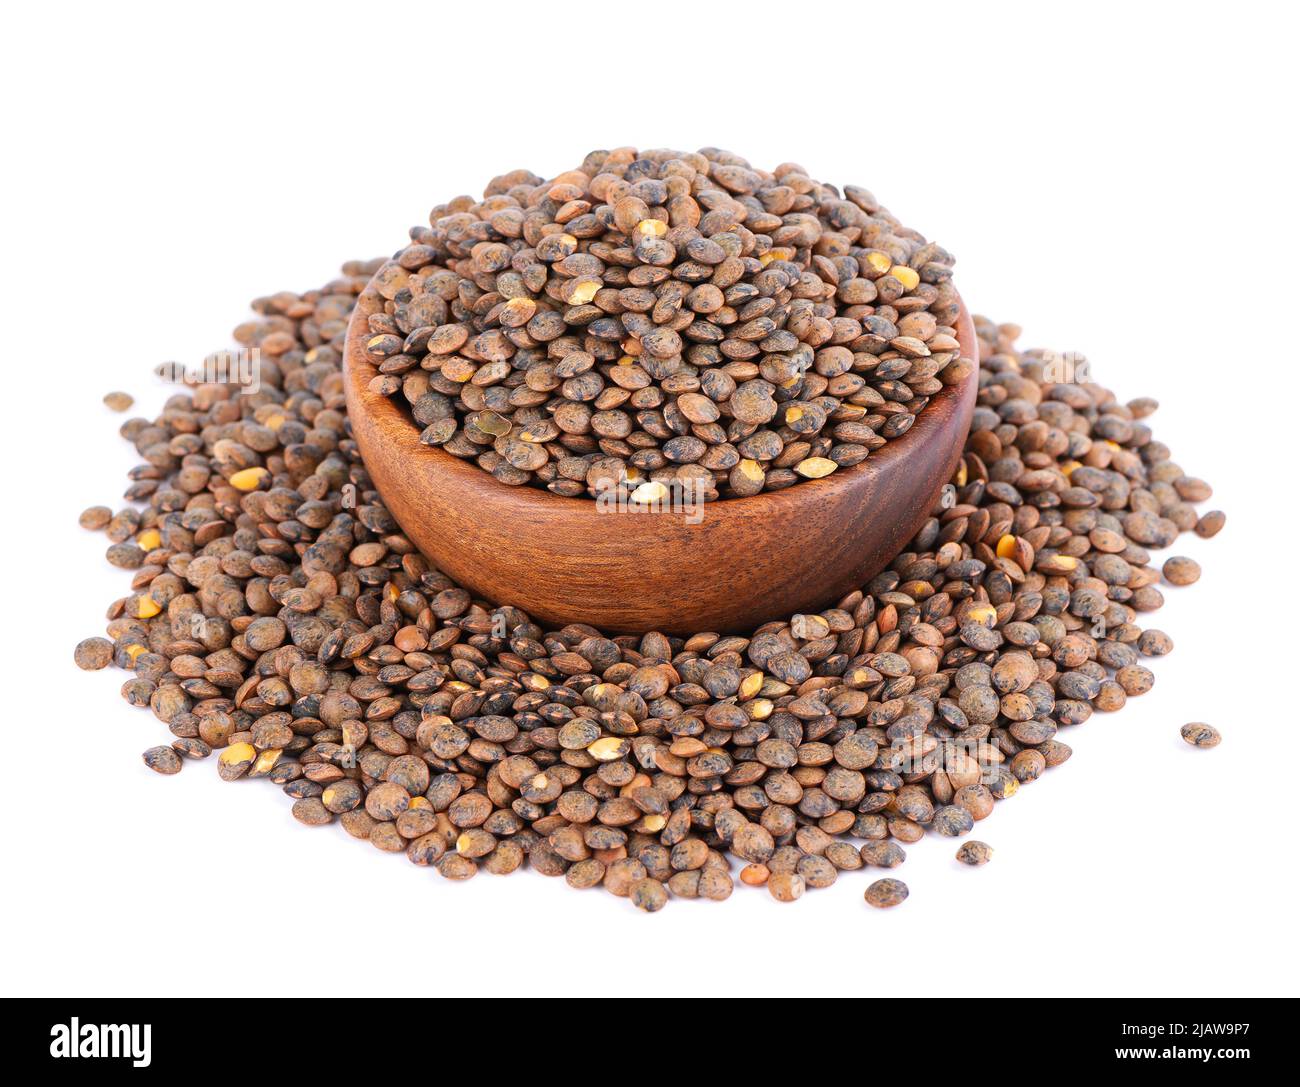 French lentils in wooden bowl, isolated on white background. Dry puy lentil grains pile Stock Photo